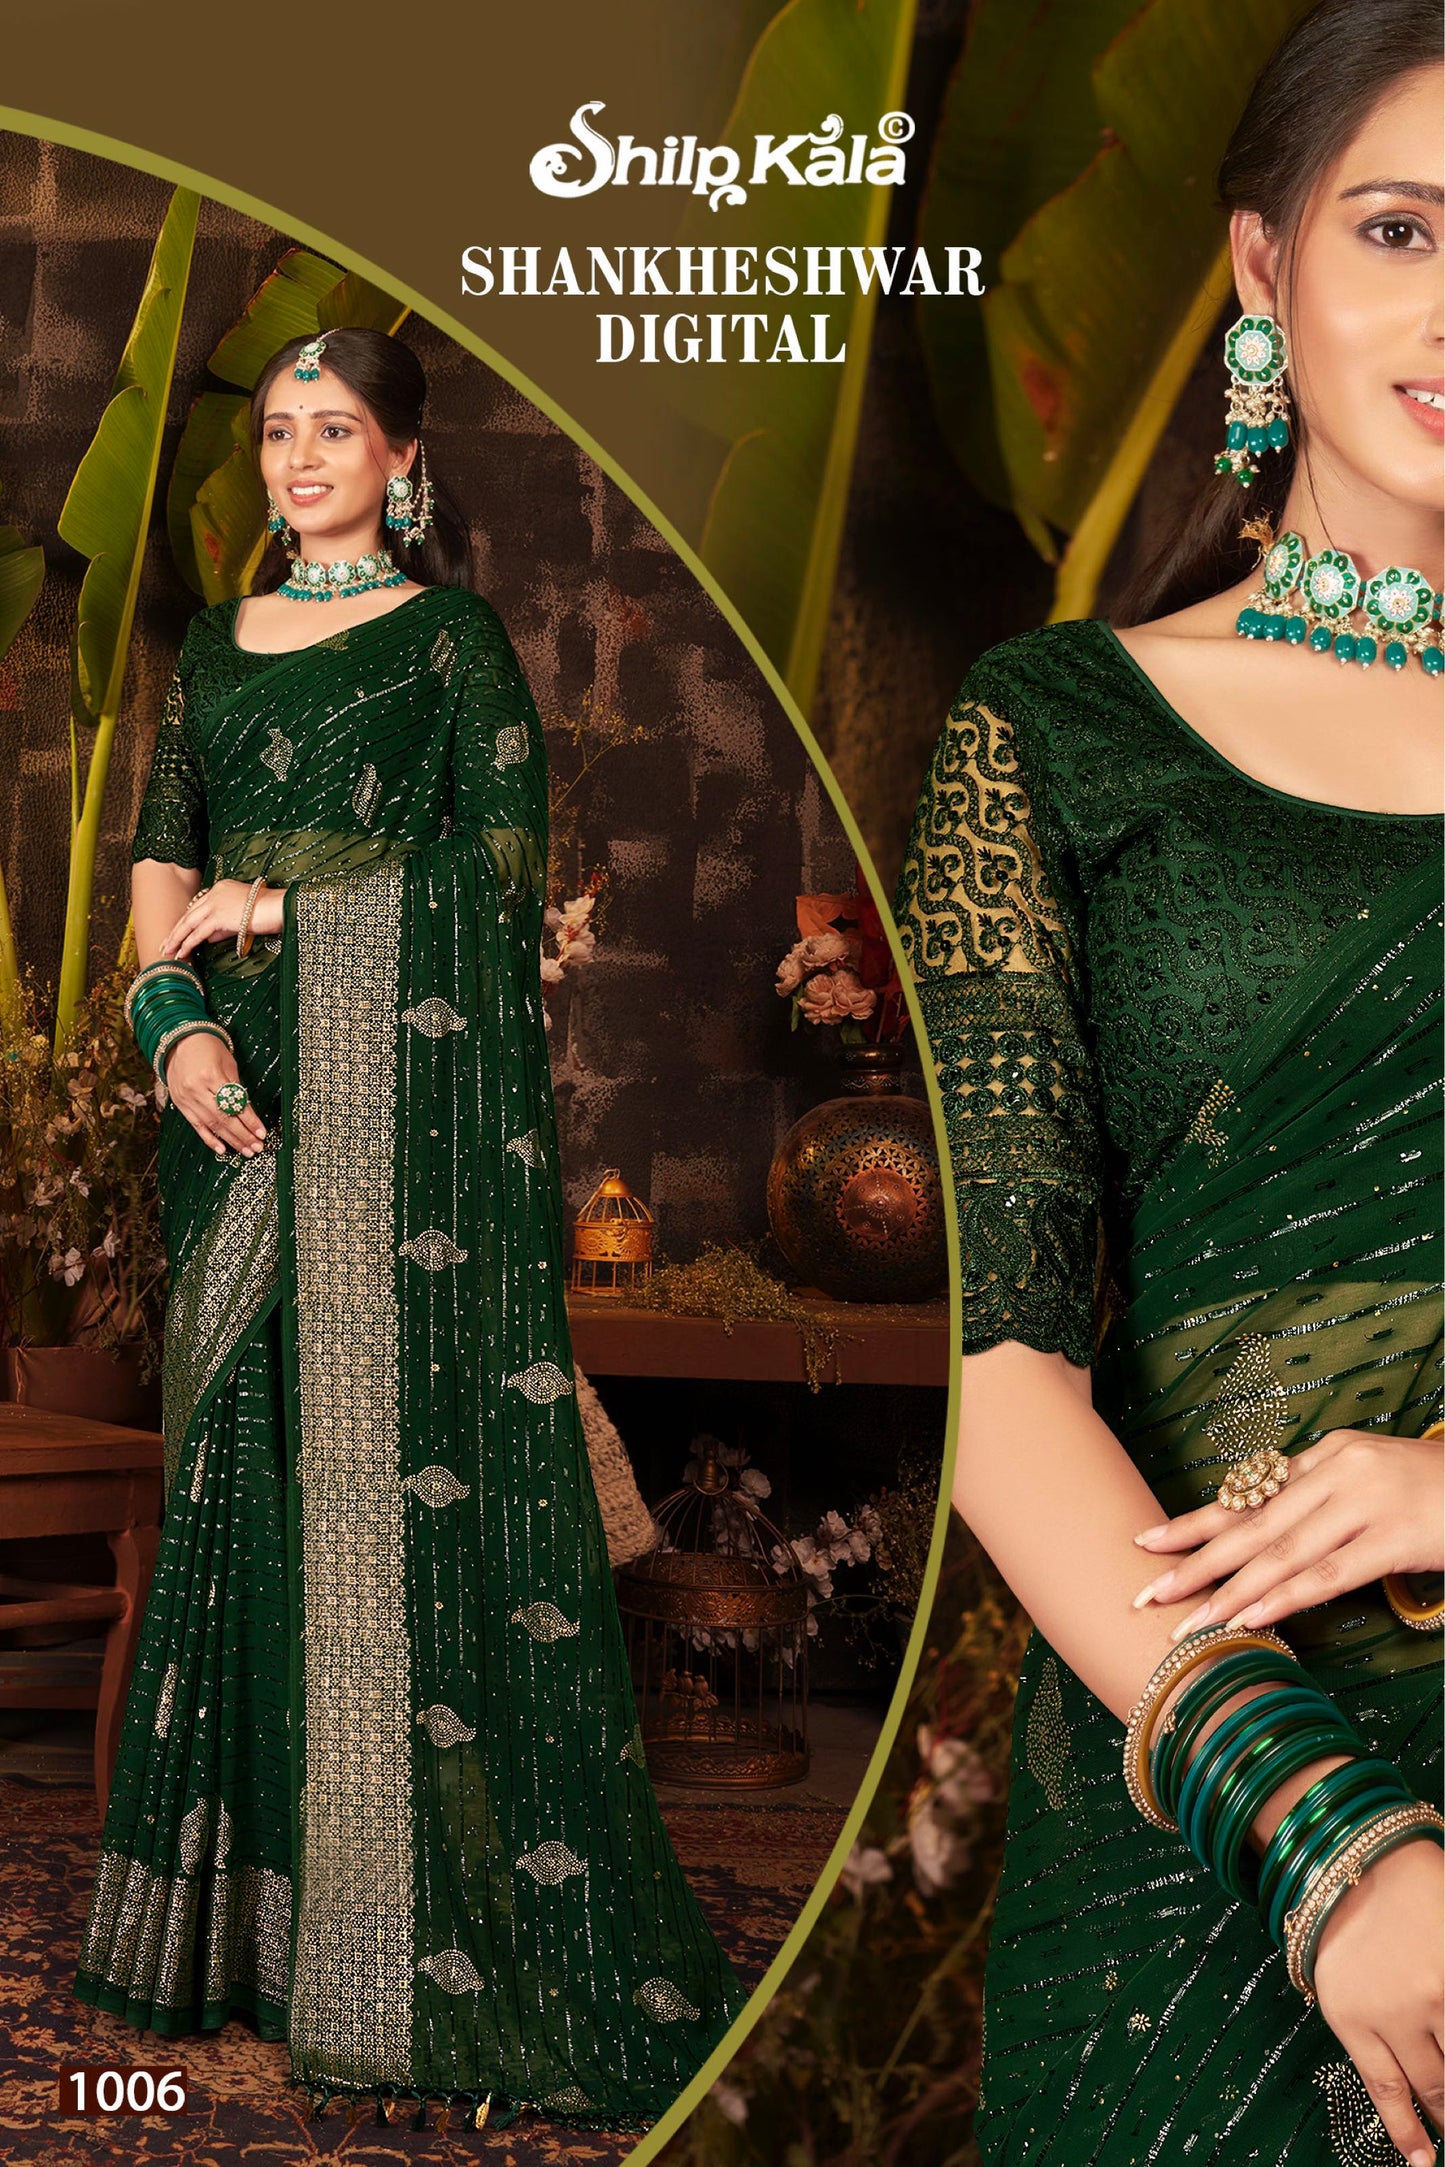 Sankheshwar Multicolour Fancy Rimjhim Saree with Net Blouse and Tone to Tone Matching